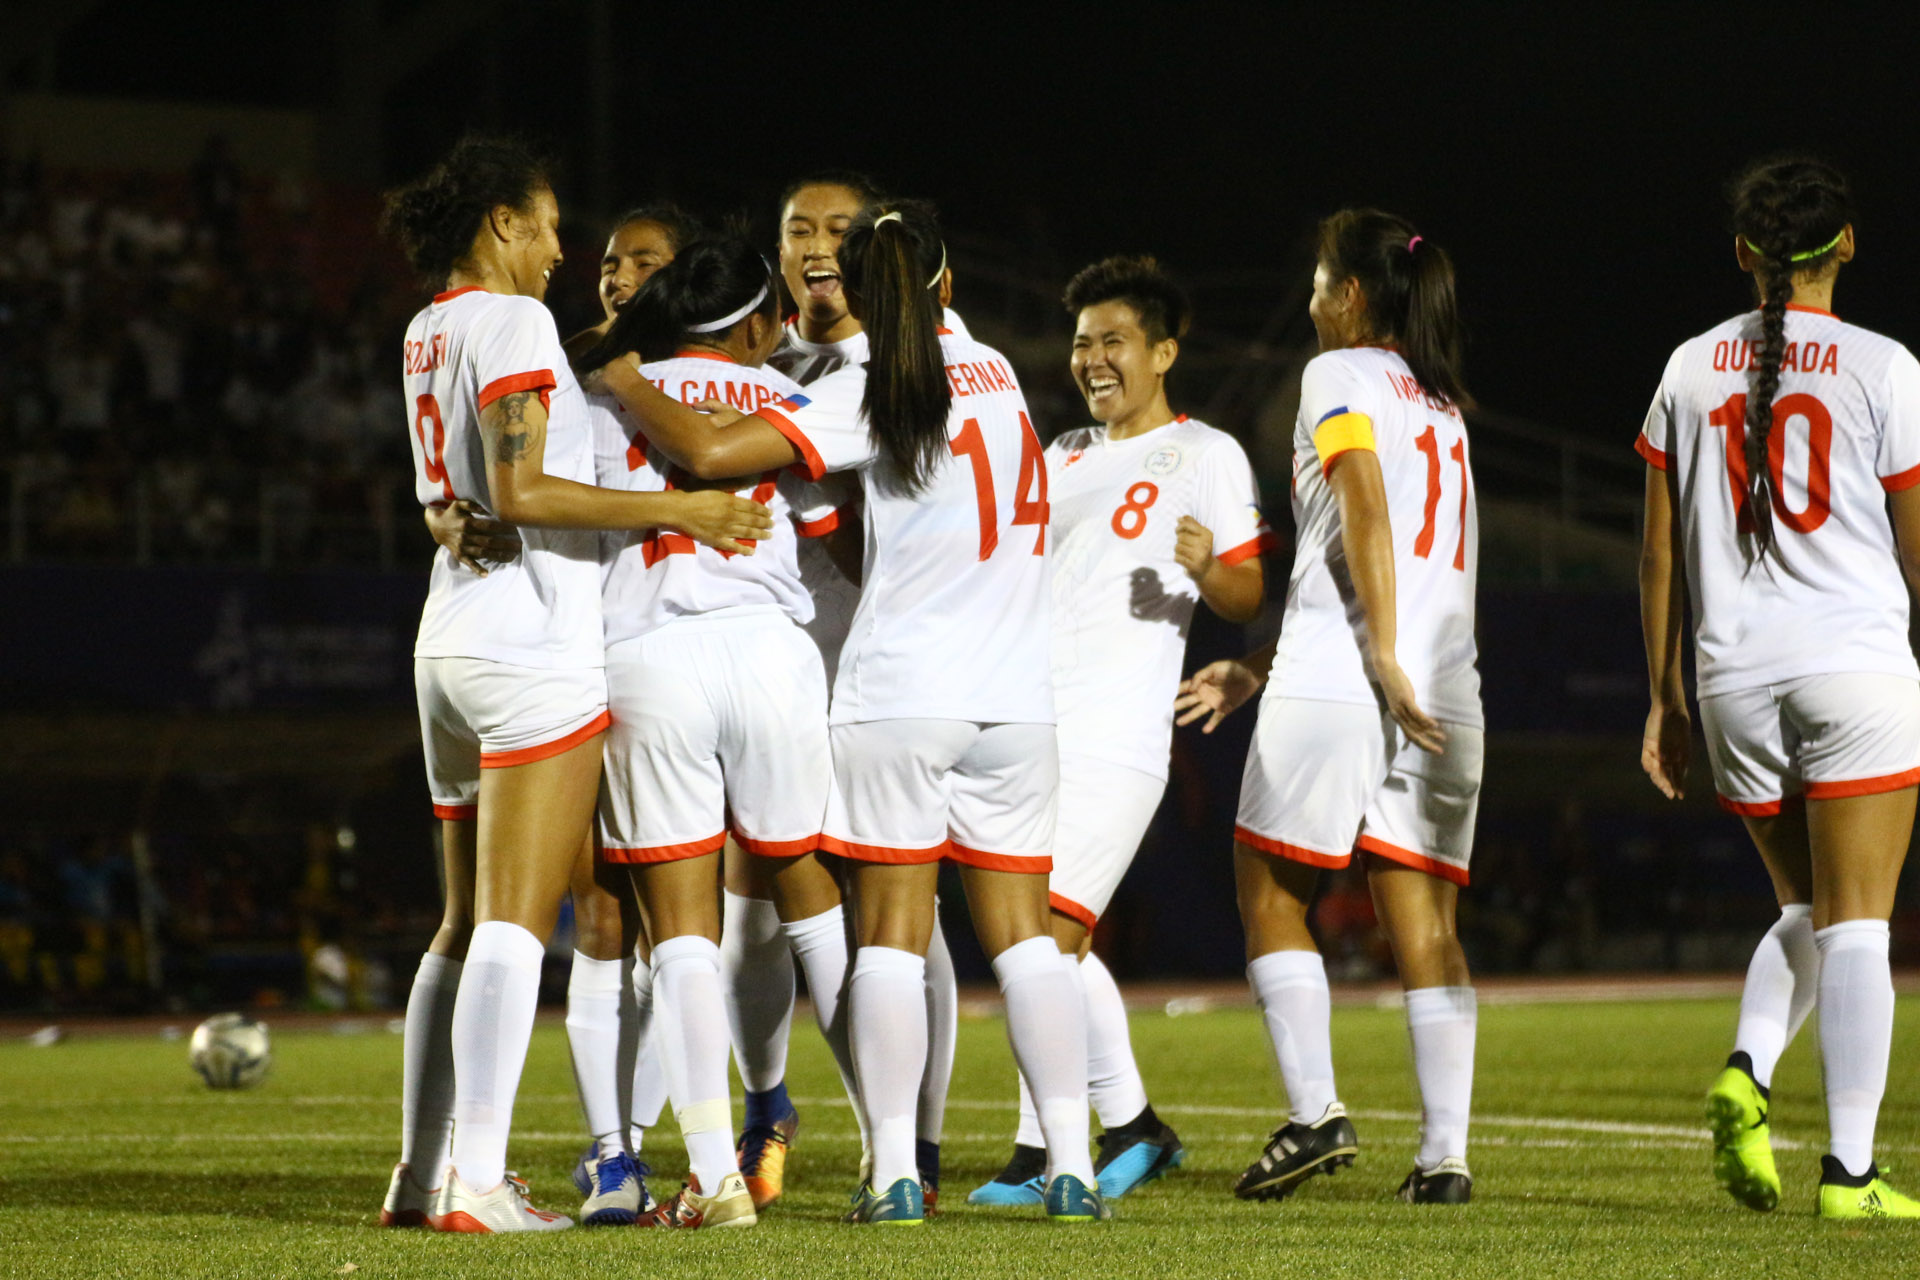 PH Women’s National Team achieves highest FIFA Ranking at No. 65 The